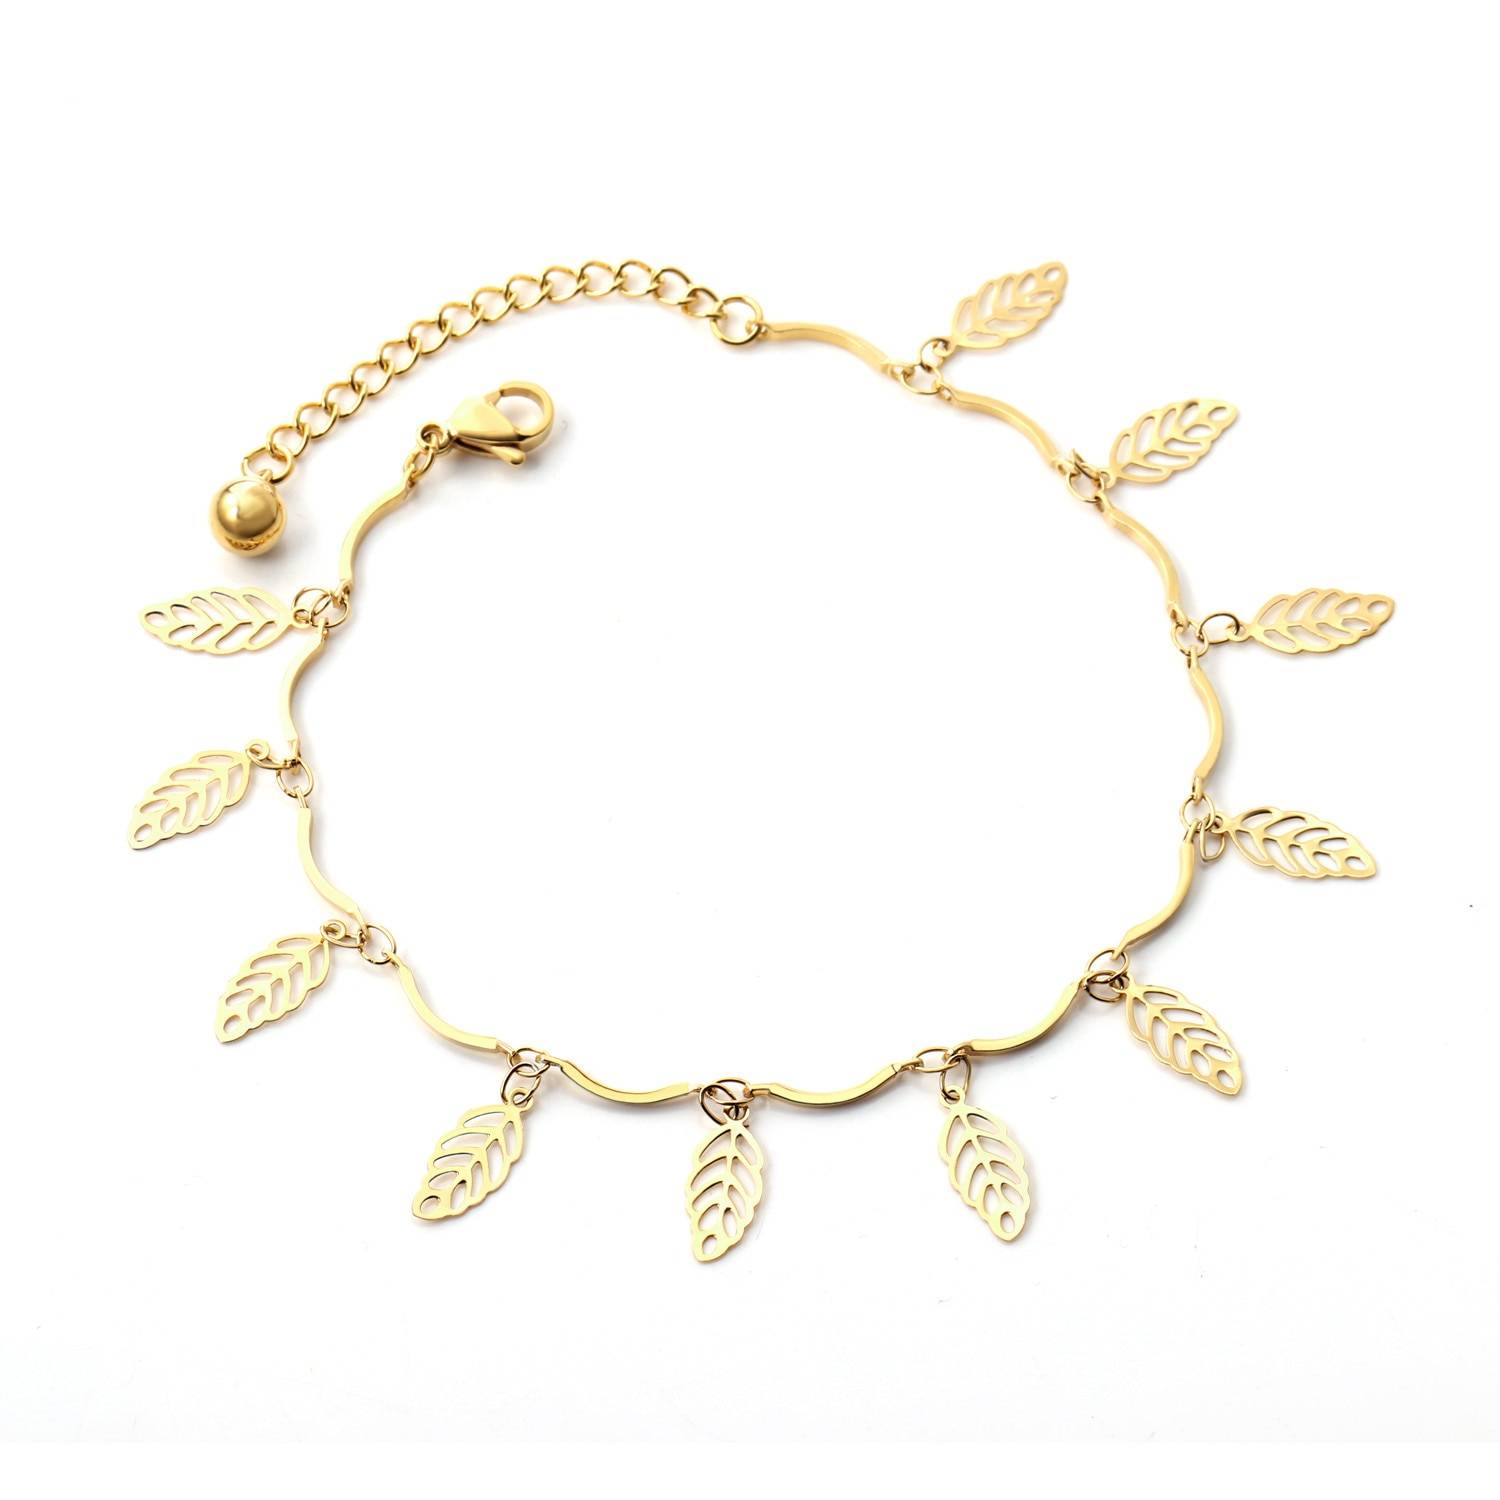 LOLA – Stainless Steel Leaf Chains Anklet Anklets 8d255f28538fbae46aeae7: Gold